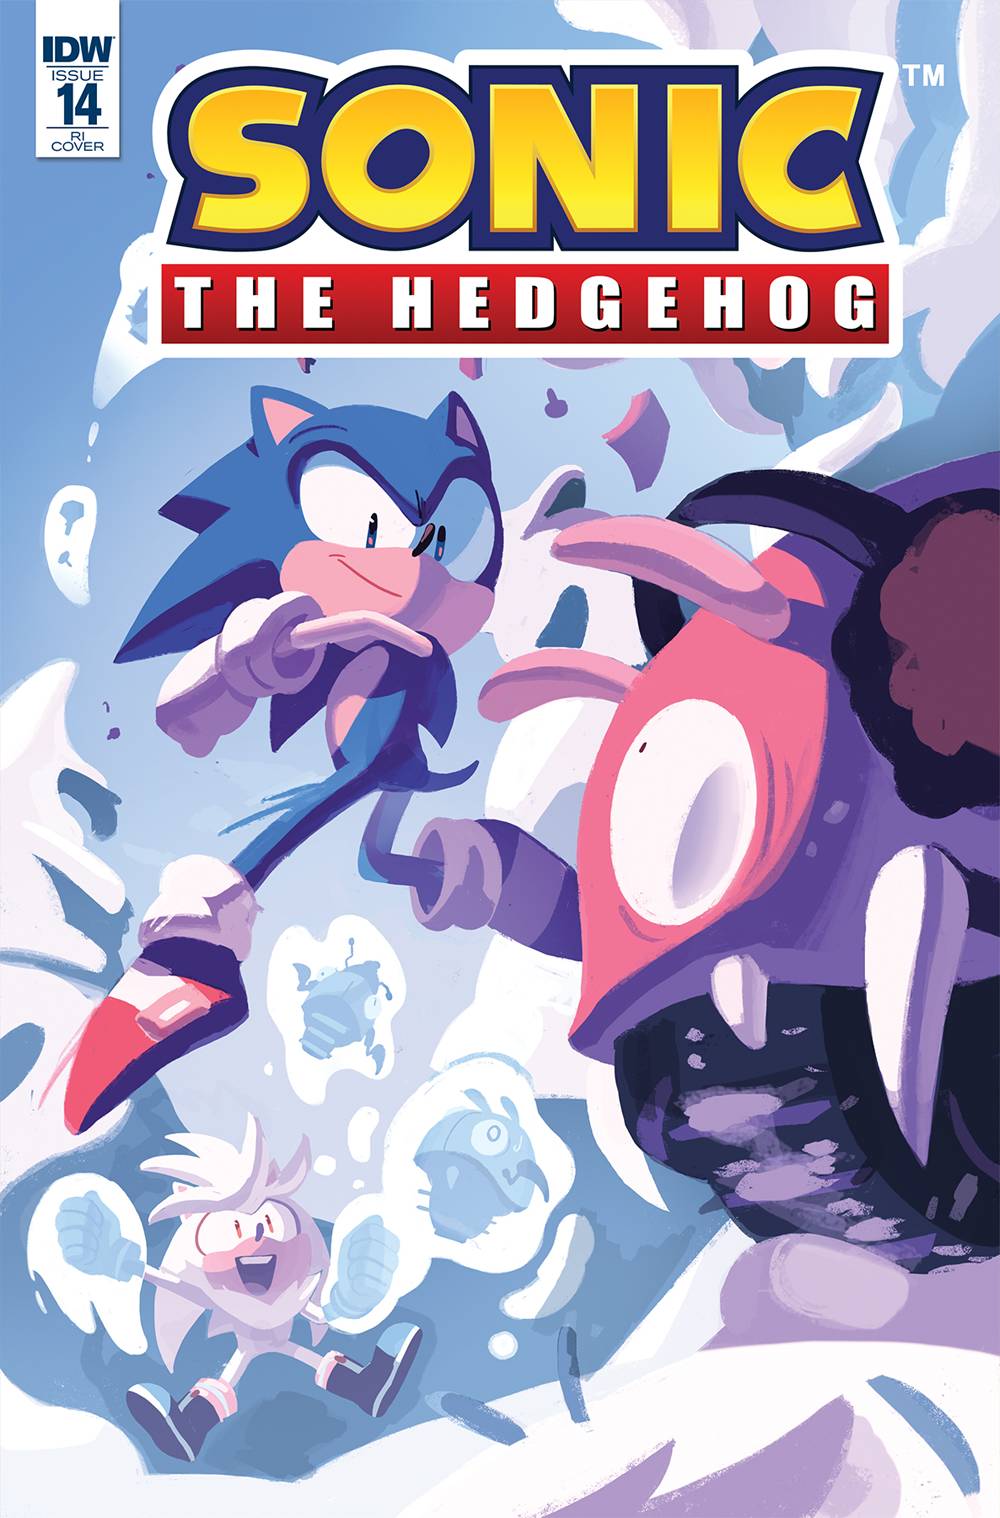 Sonic the Hedgehog #14 1 for 10 Incentive Fourdraine